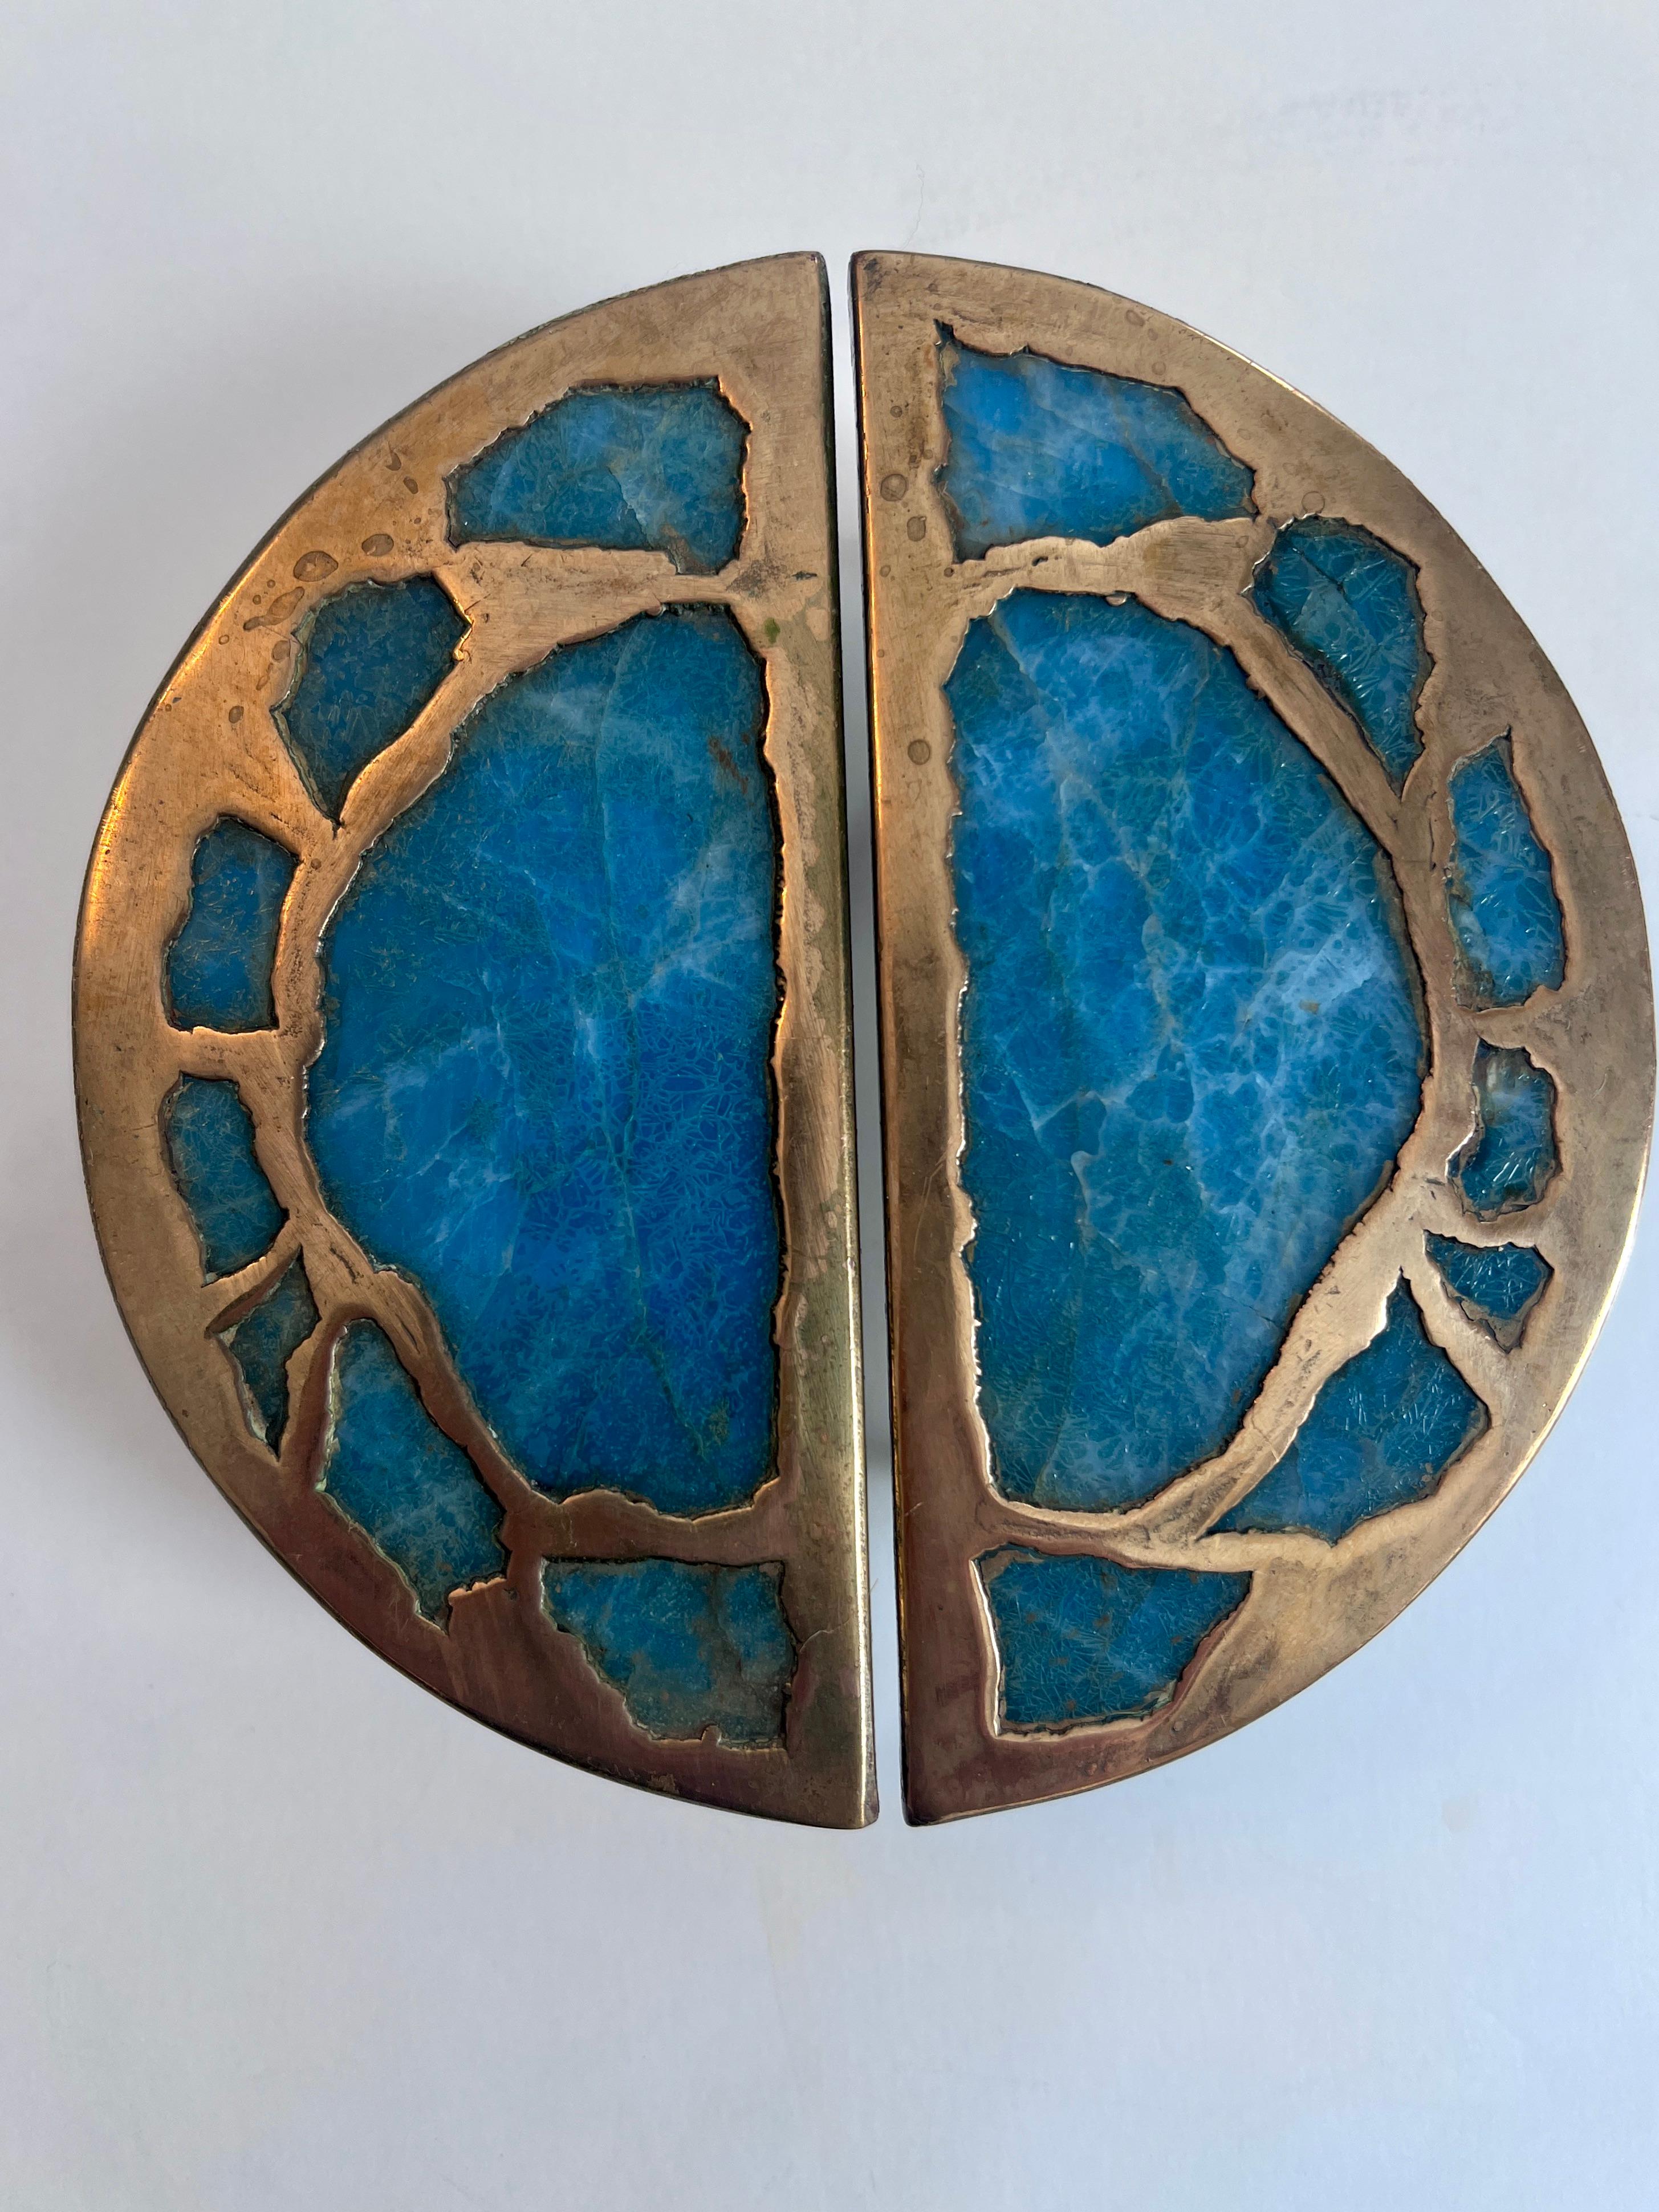 A wonderful pair of hand=crafted bronze and stone pulls by Mexican artisan Pepe Mendoza.  The pair come together to create a 6